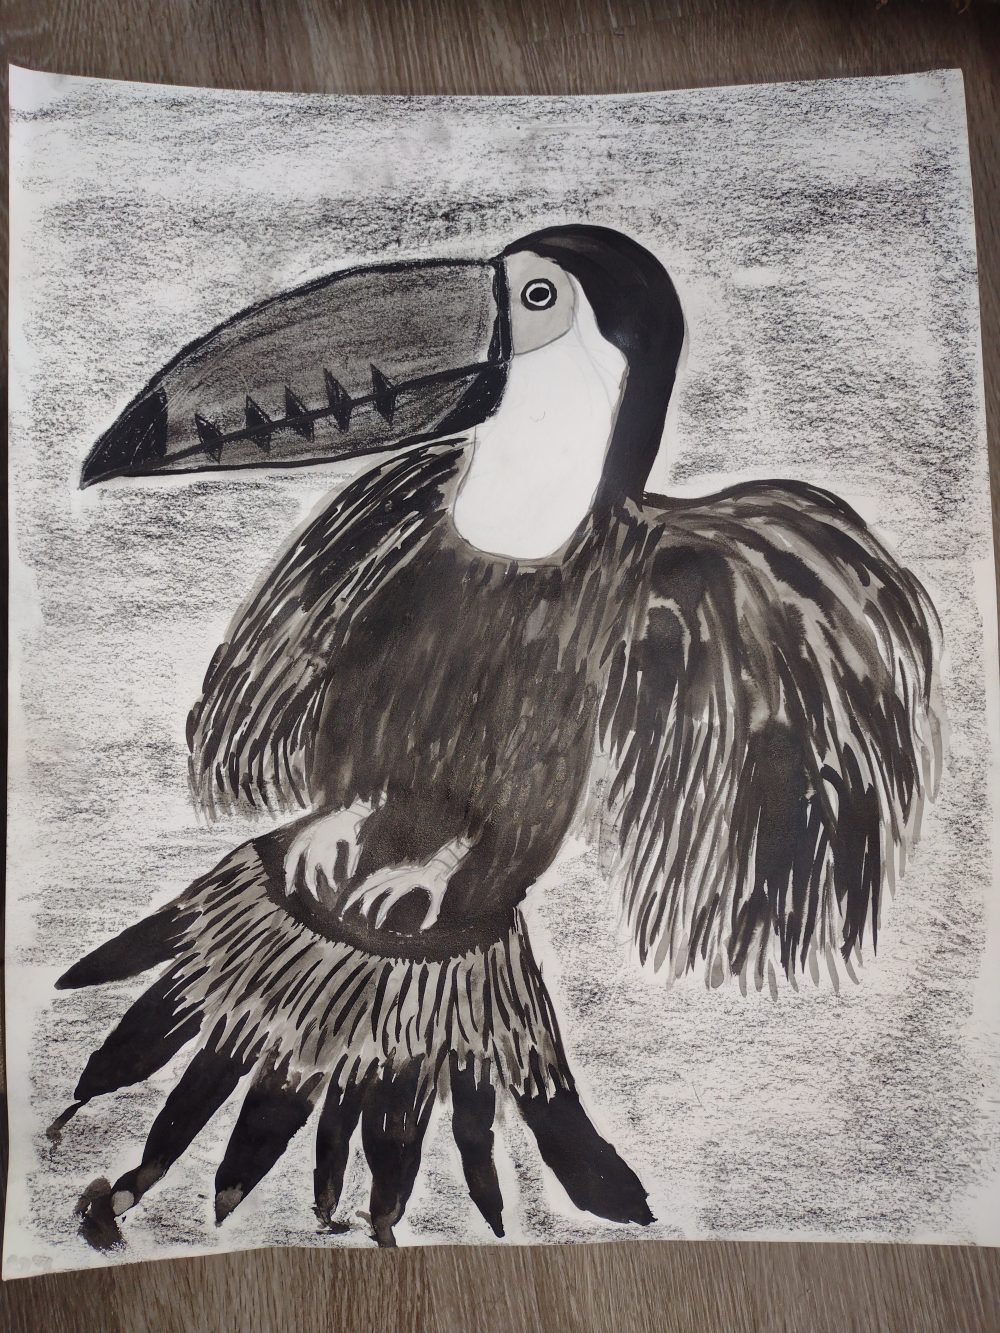 Charcoal background and an elevated Toucan ready to fly away.